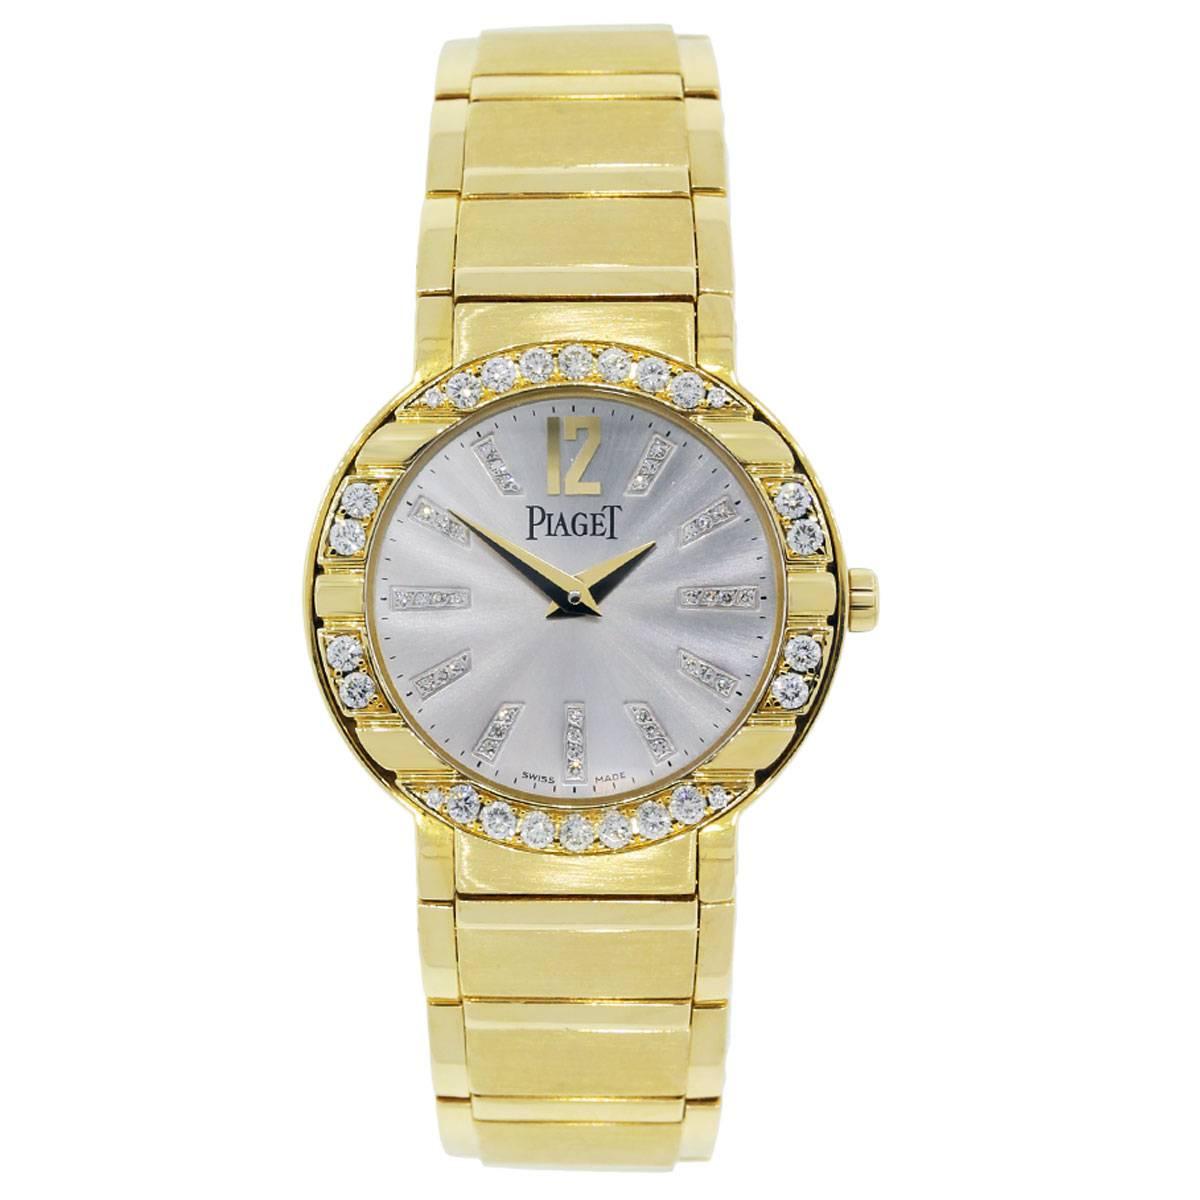 Brand: Piaget
Model: Polo
MPN: P10141
Case Material: 18k Yellow Gold
Dial: Factory silvered diamond dial with gold hands
Bezel: Factory 18k Yellow Gold and Diamond Dial
Case Measurements: 28mm
Bracelet: 18k Yellow Gold Band
Clasp: Butterfly